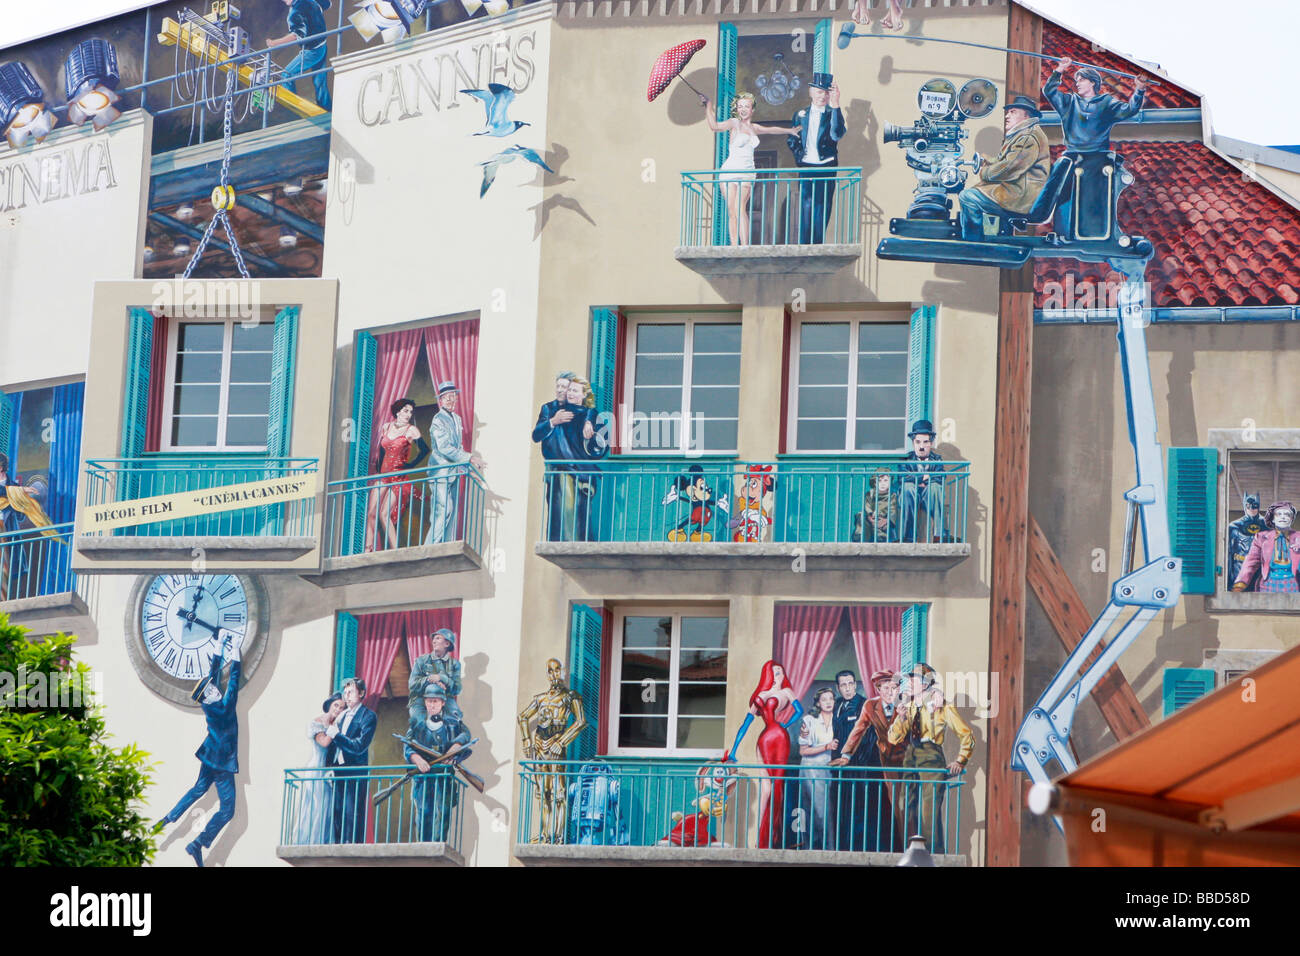 Bright,Amusing,lively murals on a building in Cannes,France,relate to the famous Cannes Film Festival held annually in the city Stock Photo